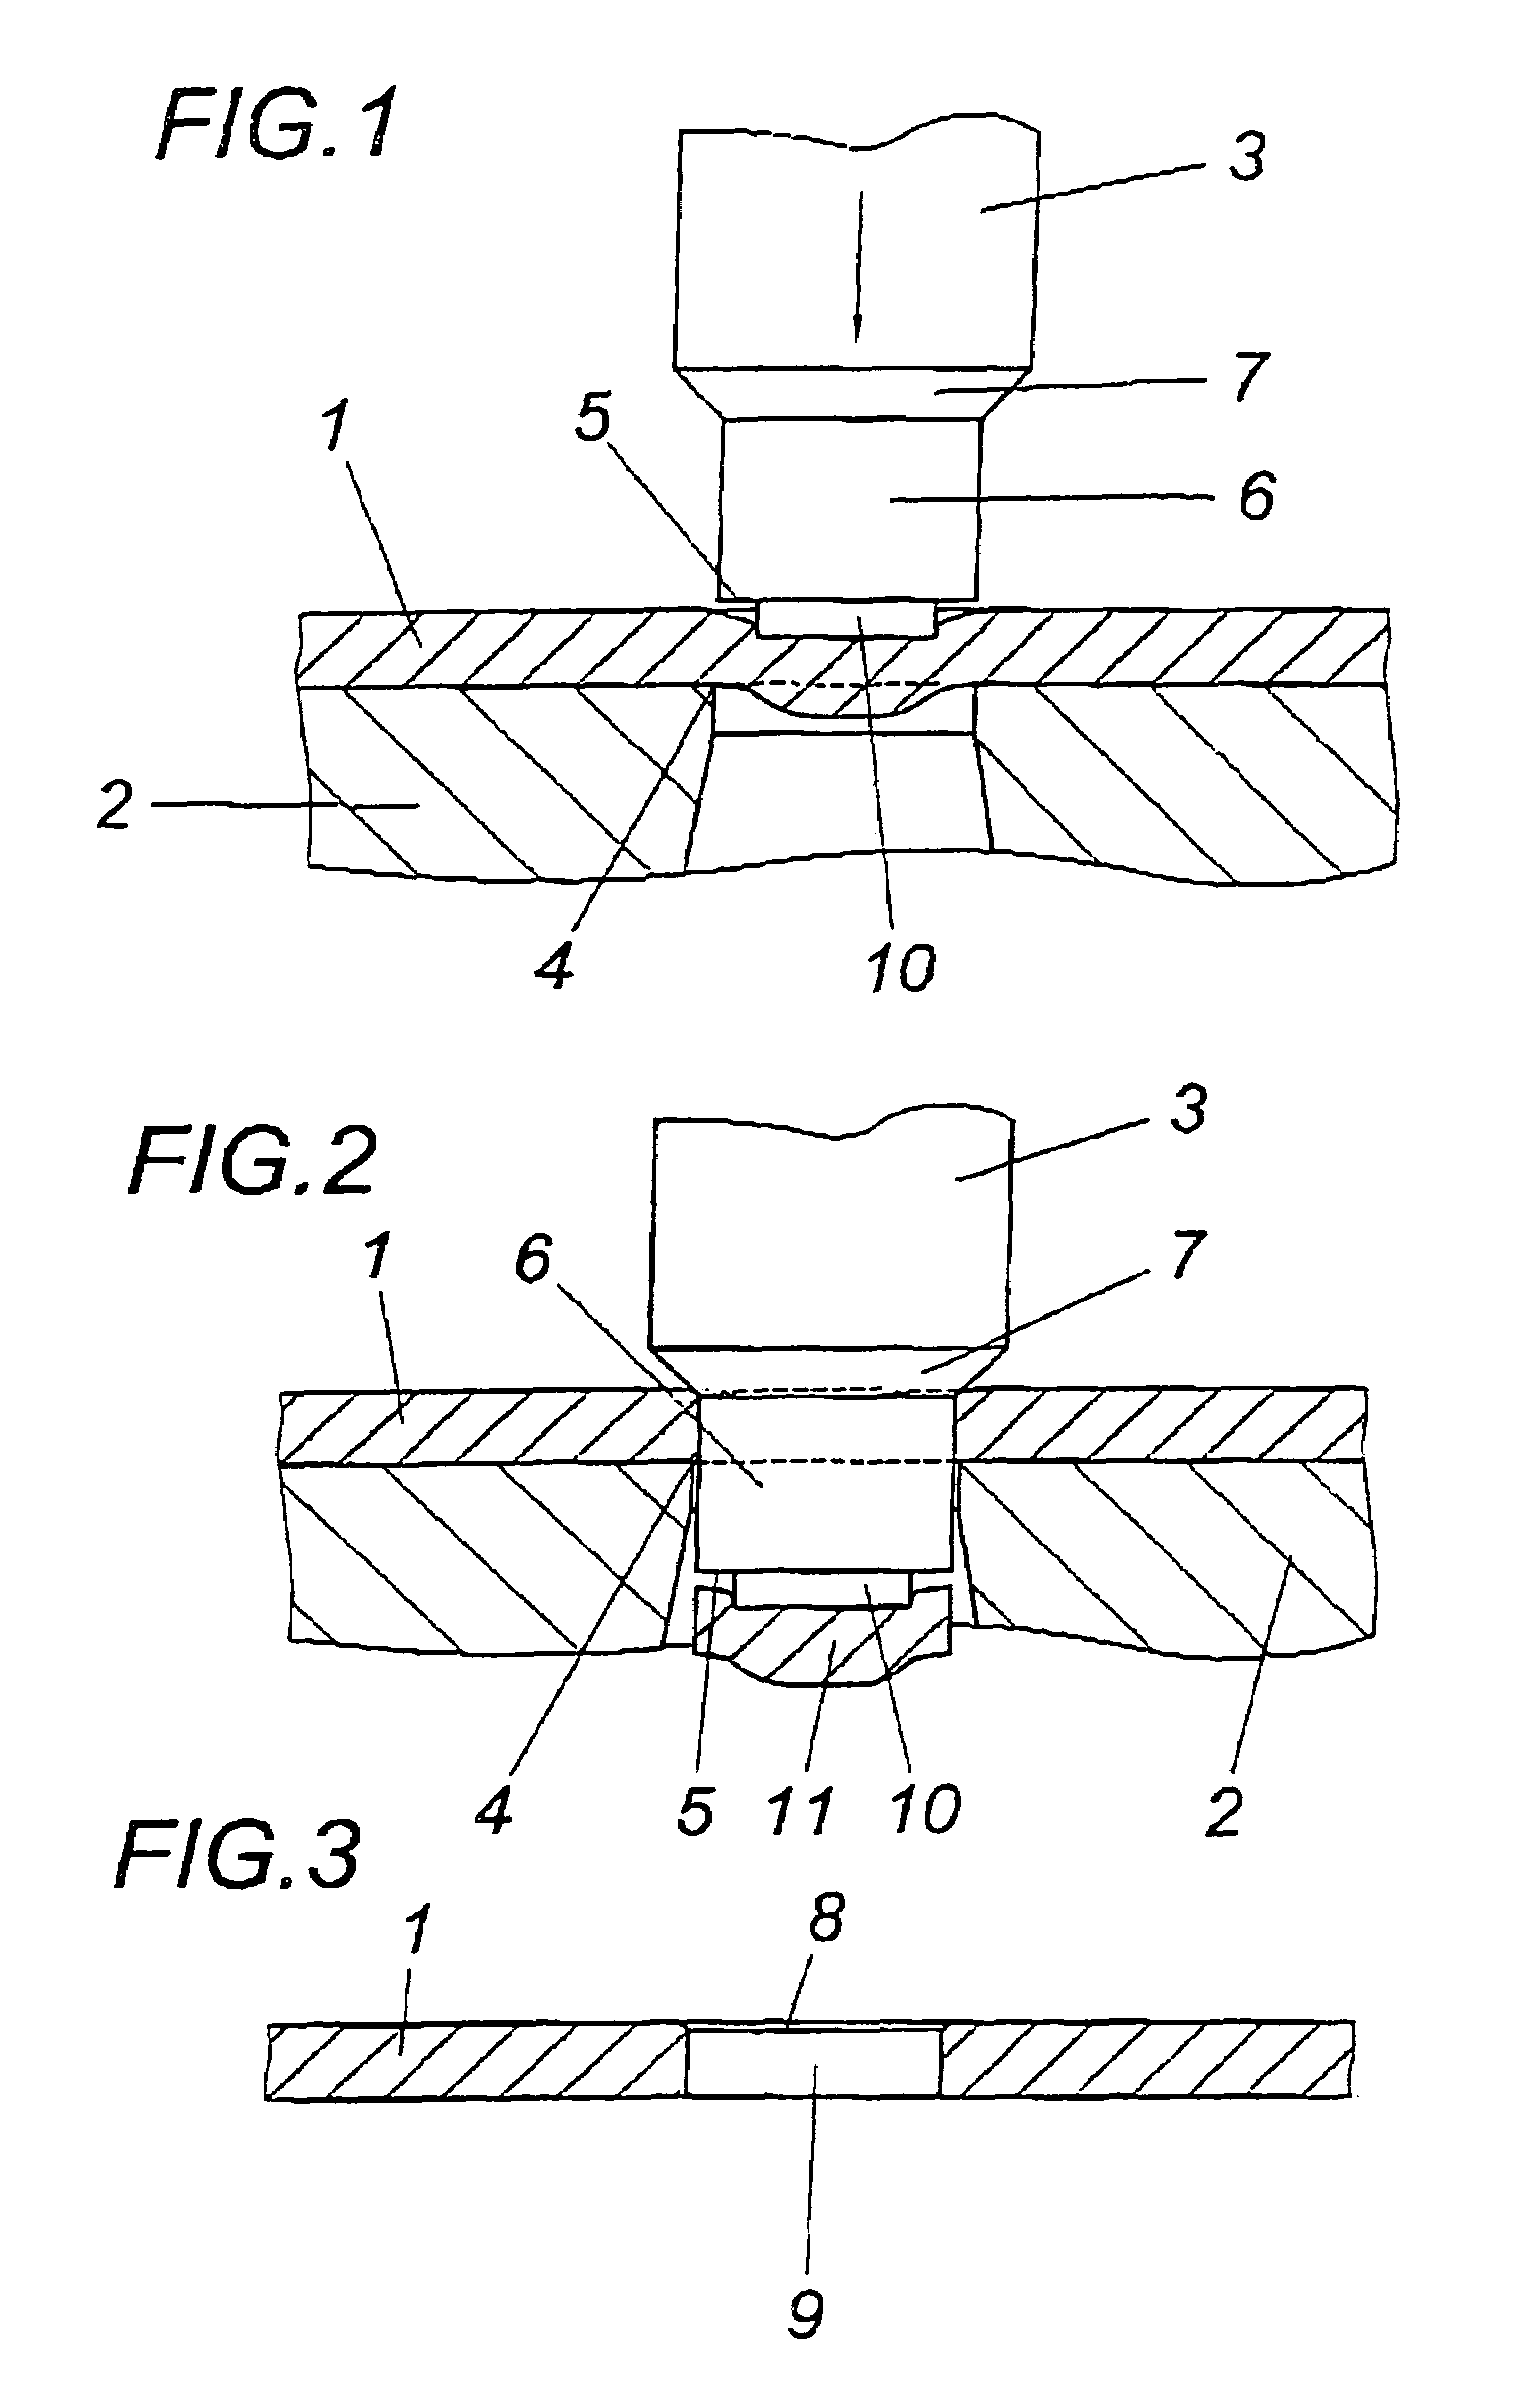 Method for perforating a sheet